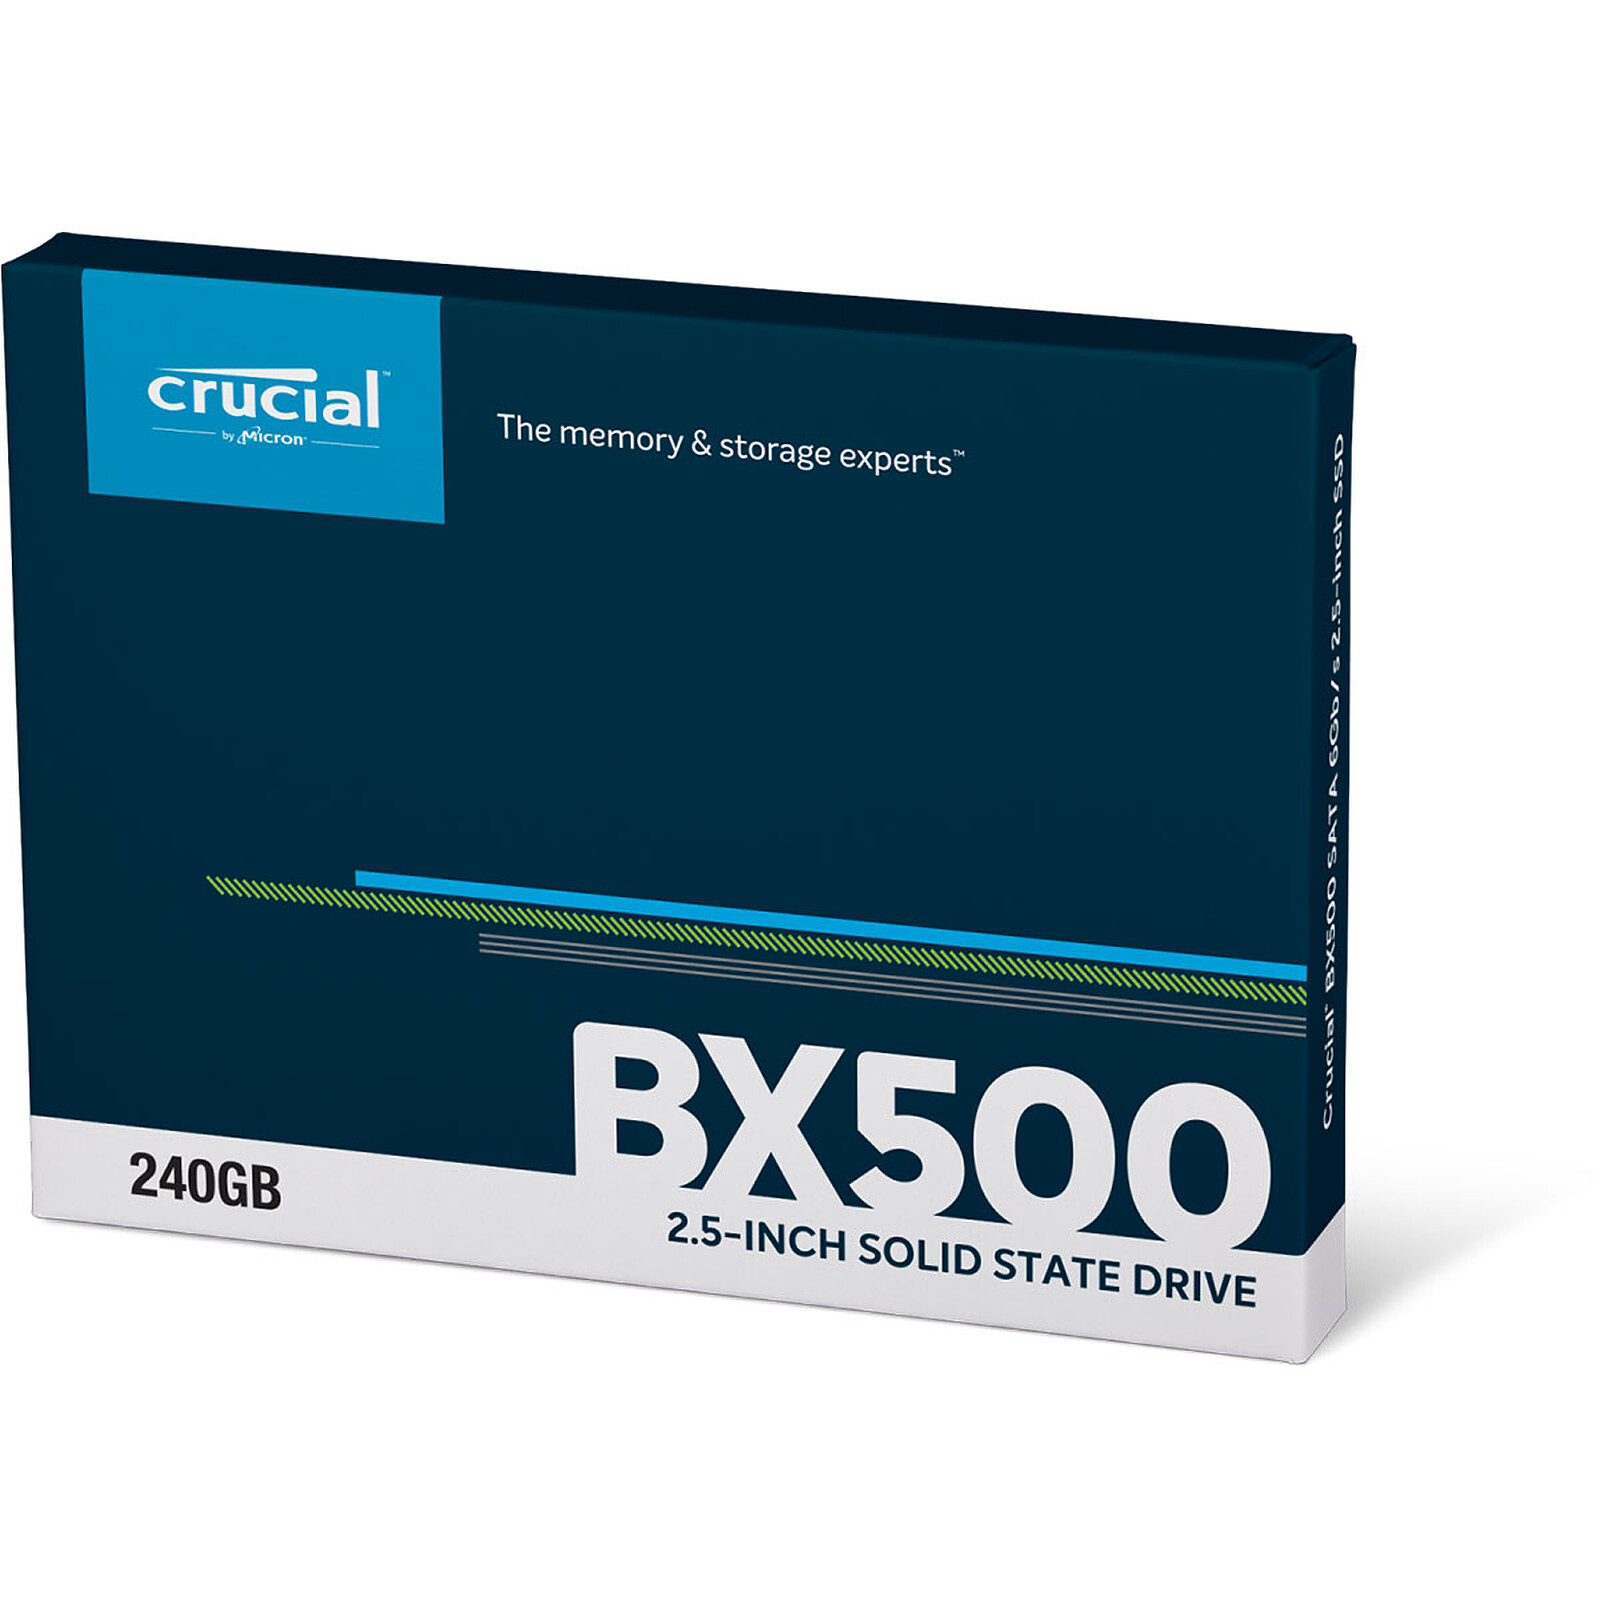 Crucial BX500 1TB & 2TB review: BX500 2.0 met QLC - Hardware Info